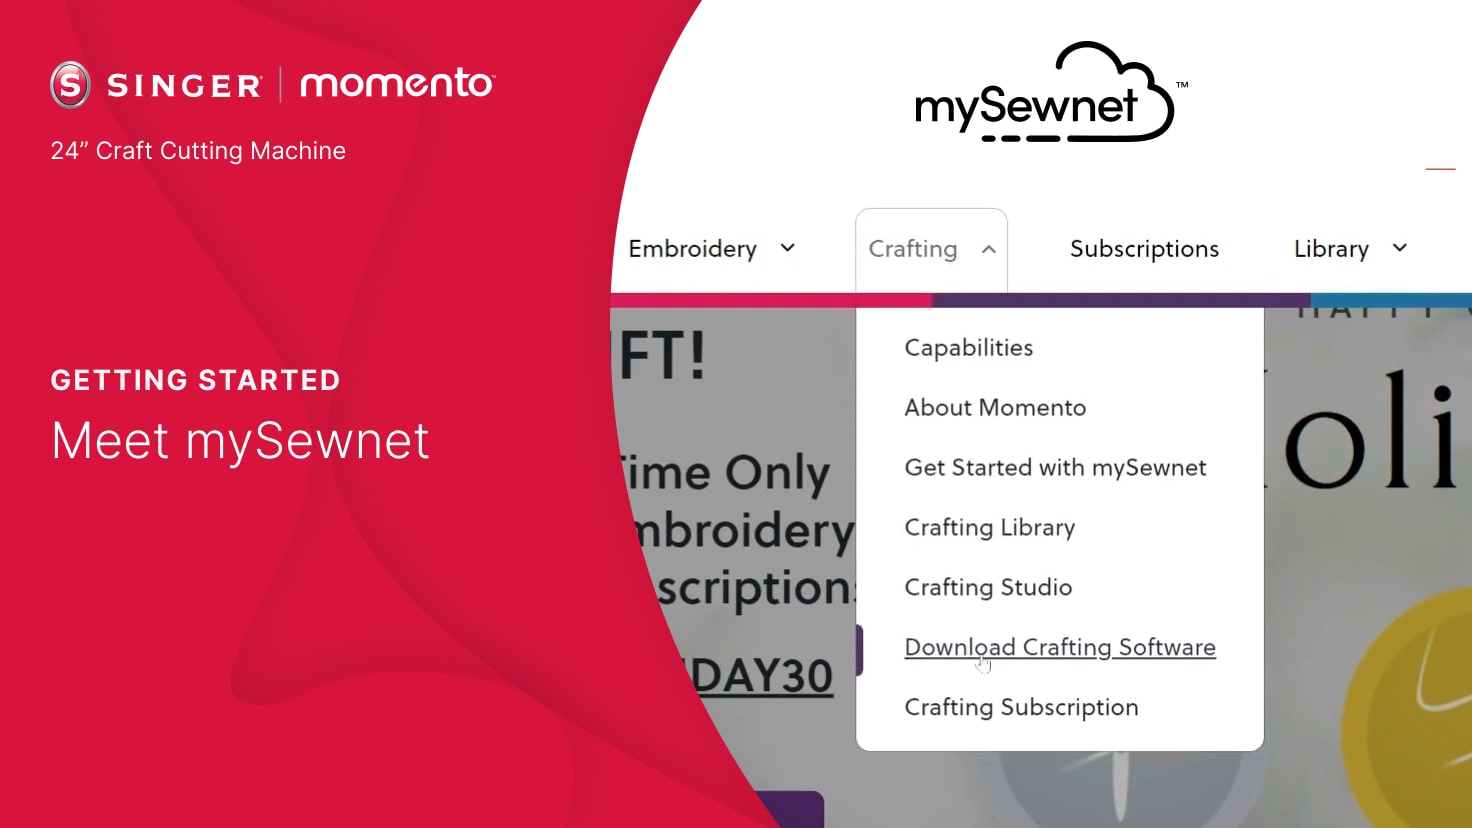 MOMENTO: Welcome to mySewnet™